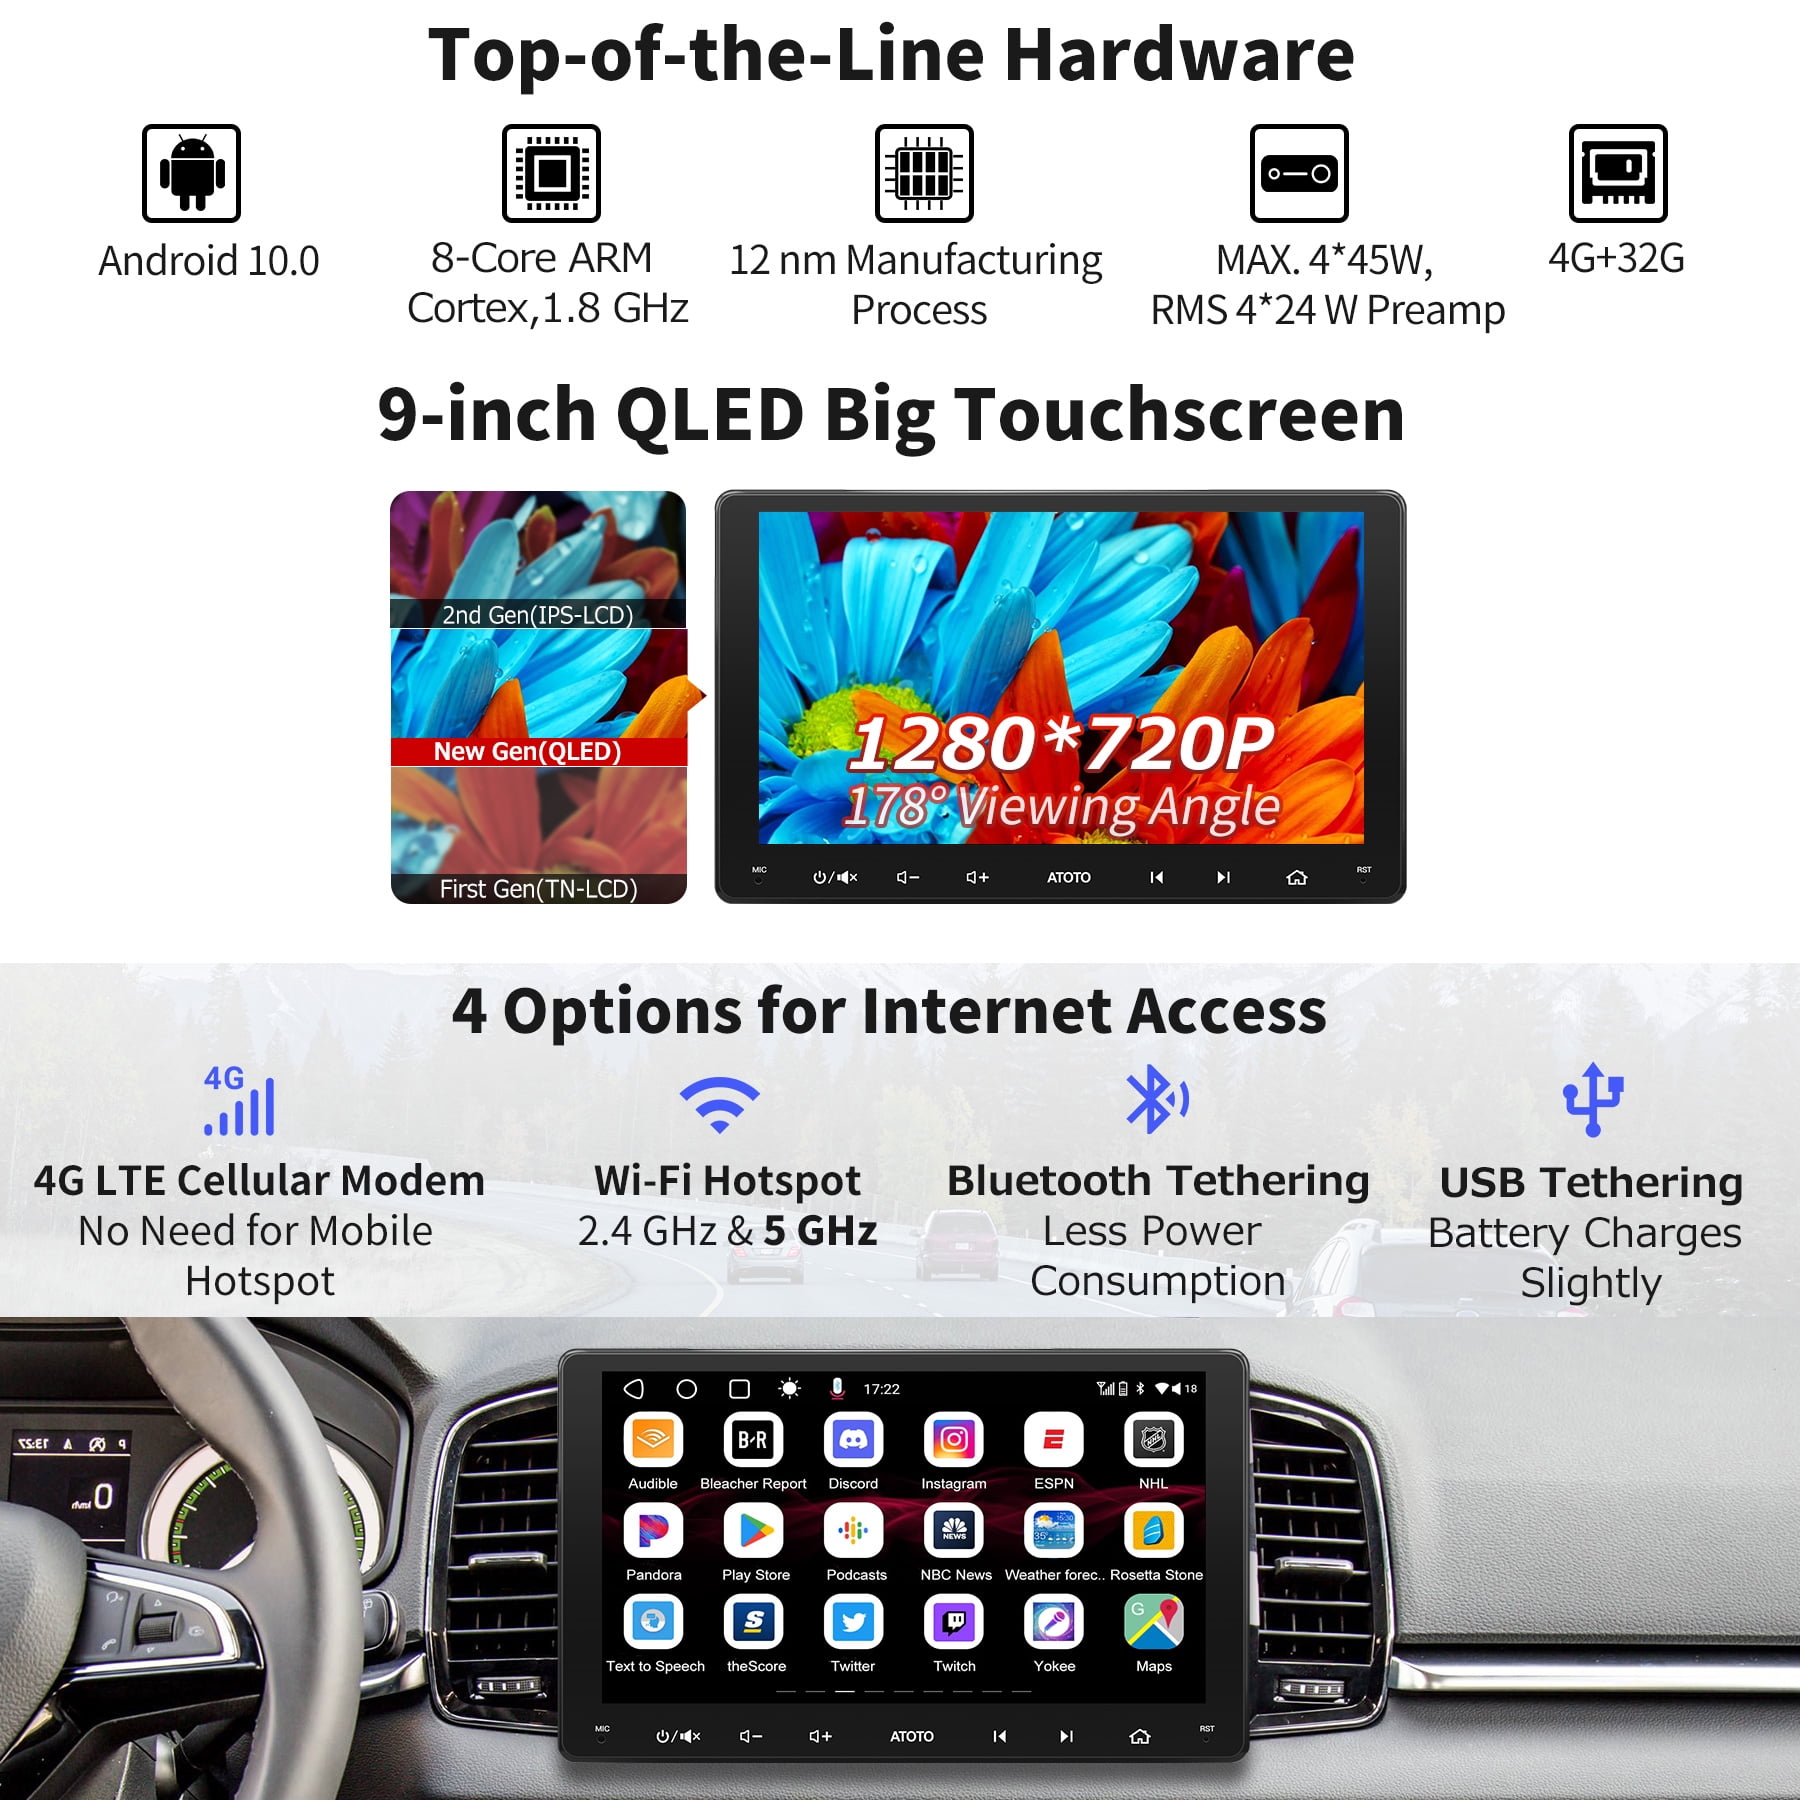 ATOTO S8G2A74SD Car Stereo Wireless Apple Carplay and Android Auto 2  Bluetooth AM FM Radio Receiver Aux in USB Double Din 7Inch Touchscreen with  physical buttons%EF%BC%8Cuse Internet with WiFi Bluetooth and USB